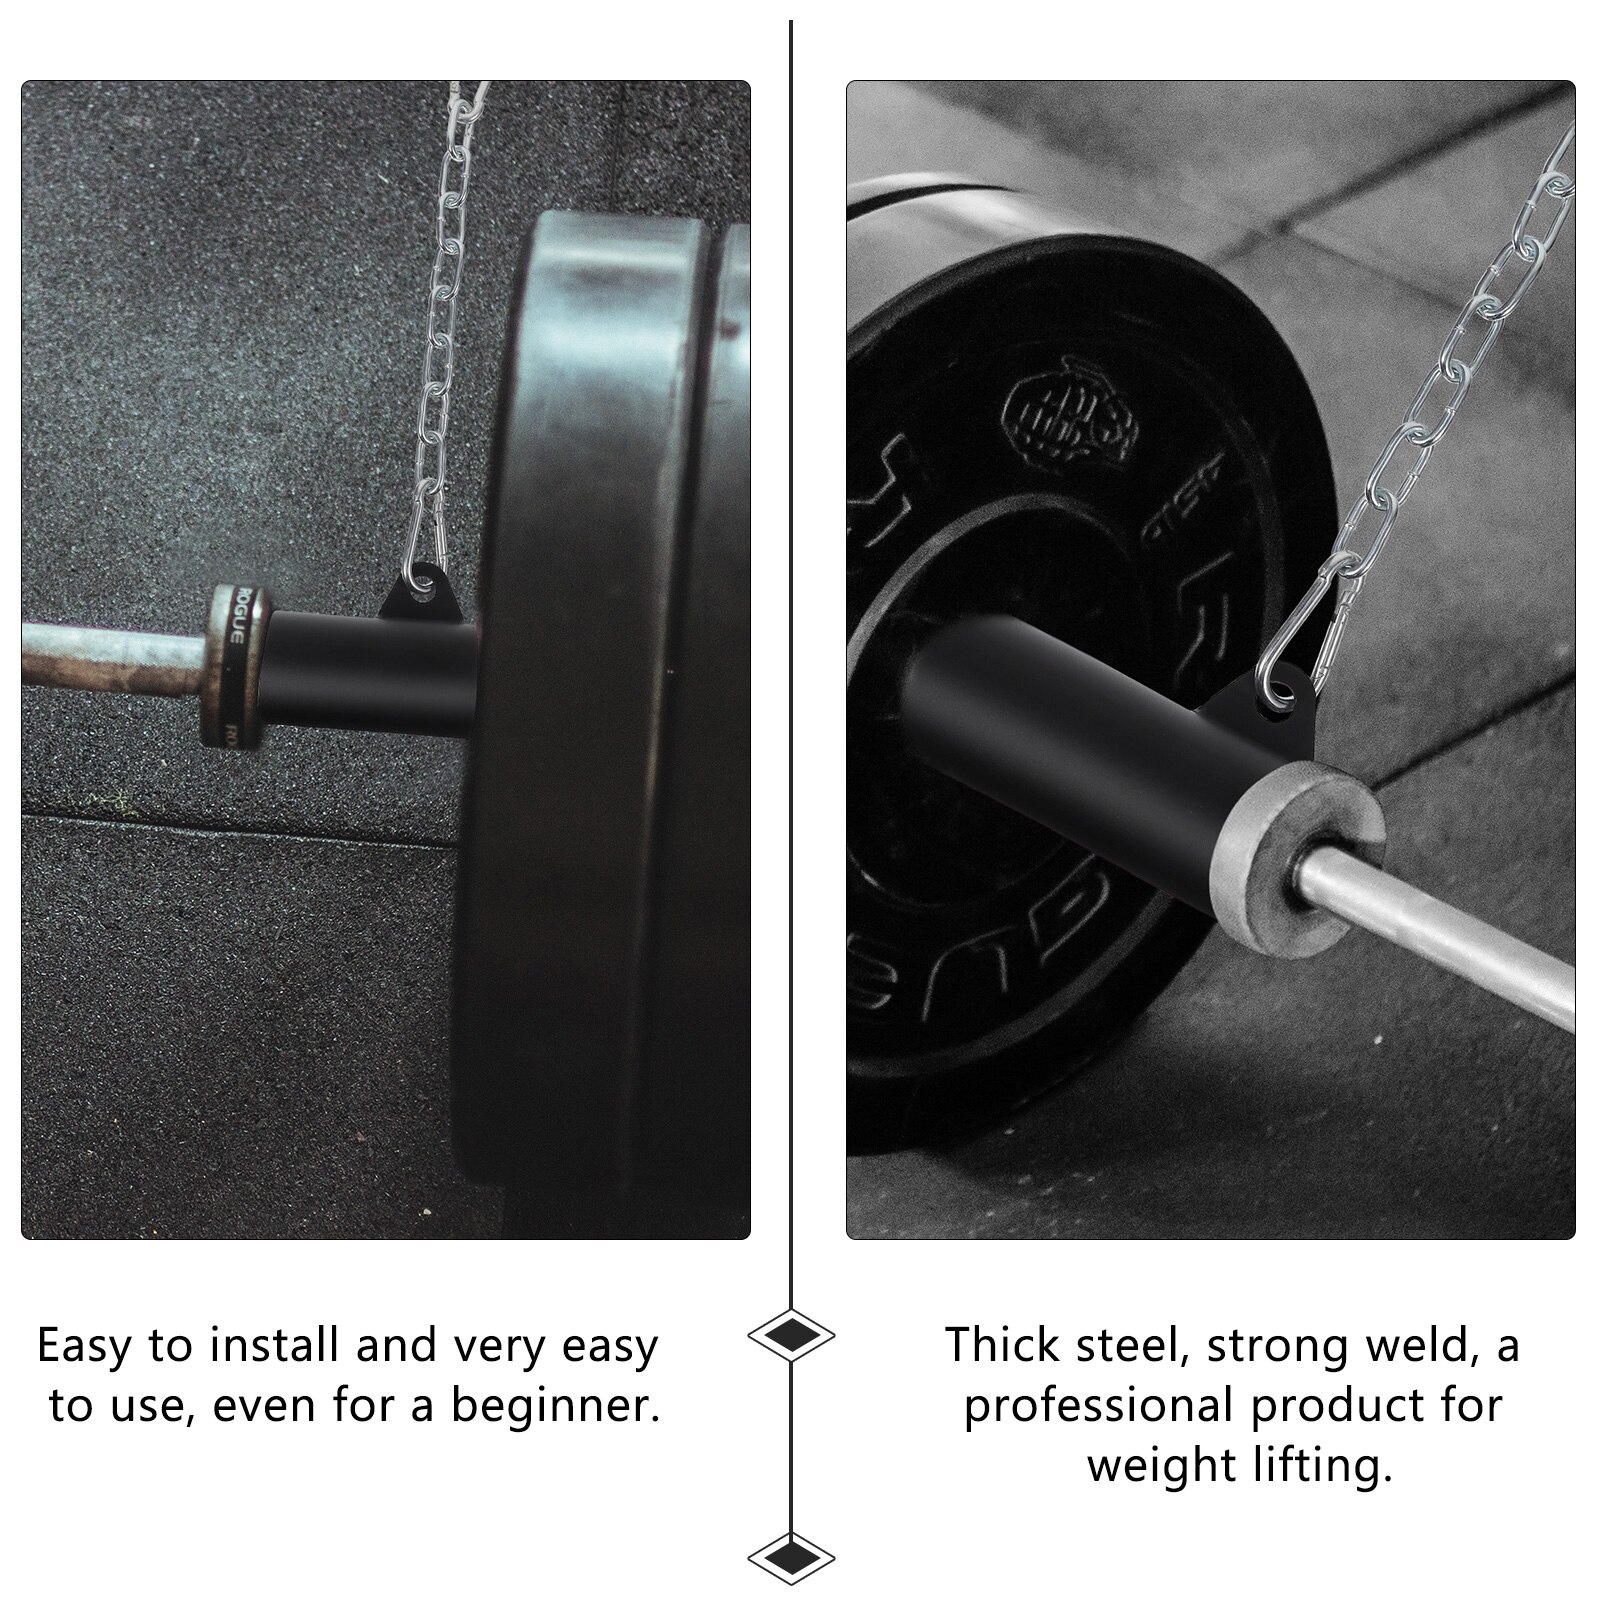 T-bar Row Platform Eyelet Attachment with Chain for Bent Over Row Exercise